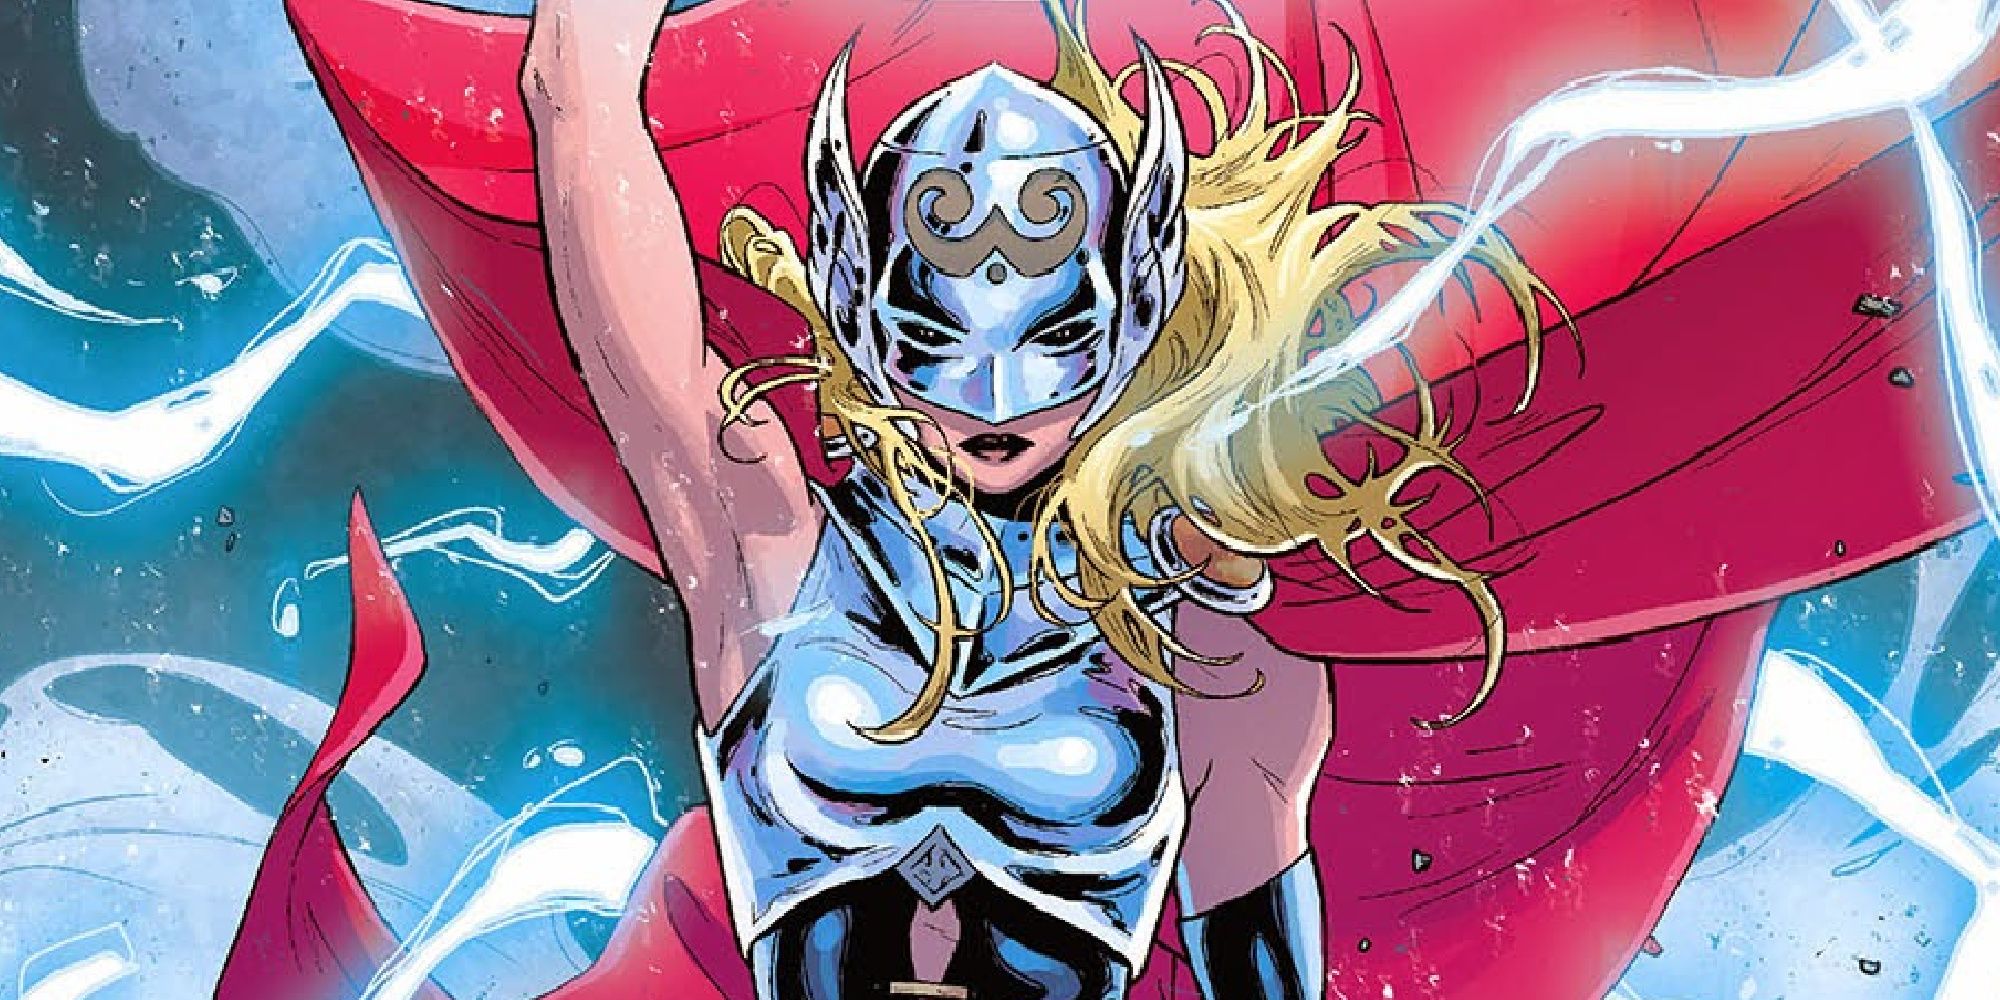 Jane Foster becomes Thor in Marvel Comics.